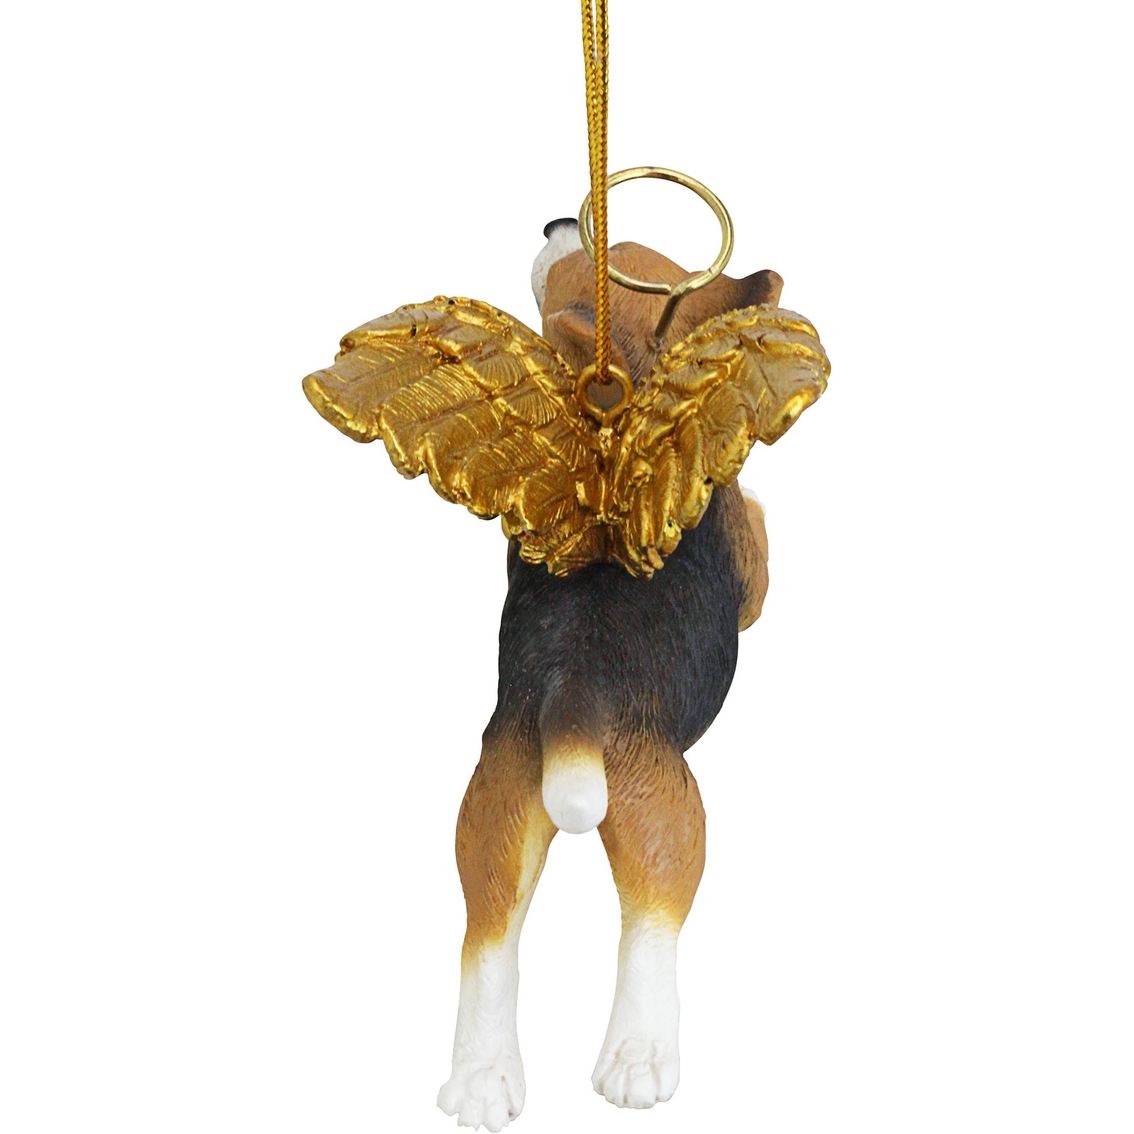 Design Toscano Honor the Pooch - Beagle Holiday Dog Angel Ornament - Image 2 of 4